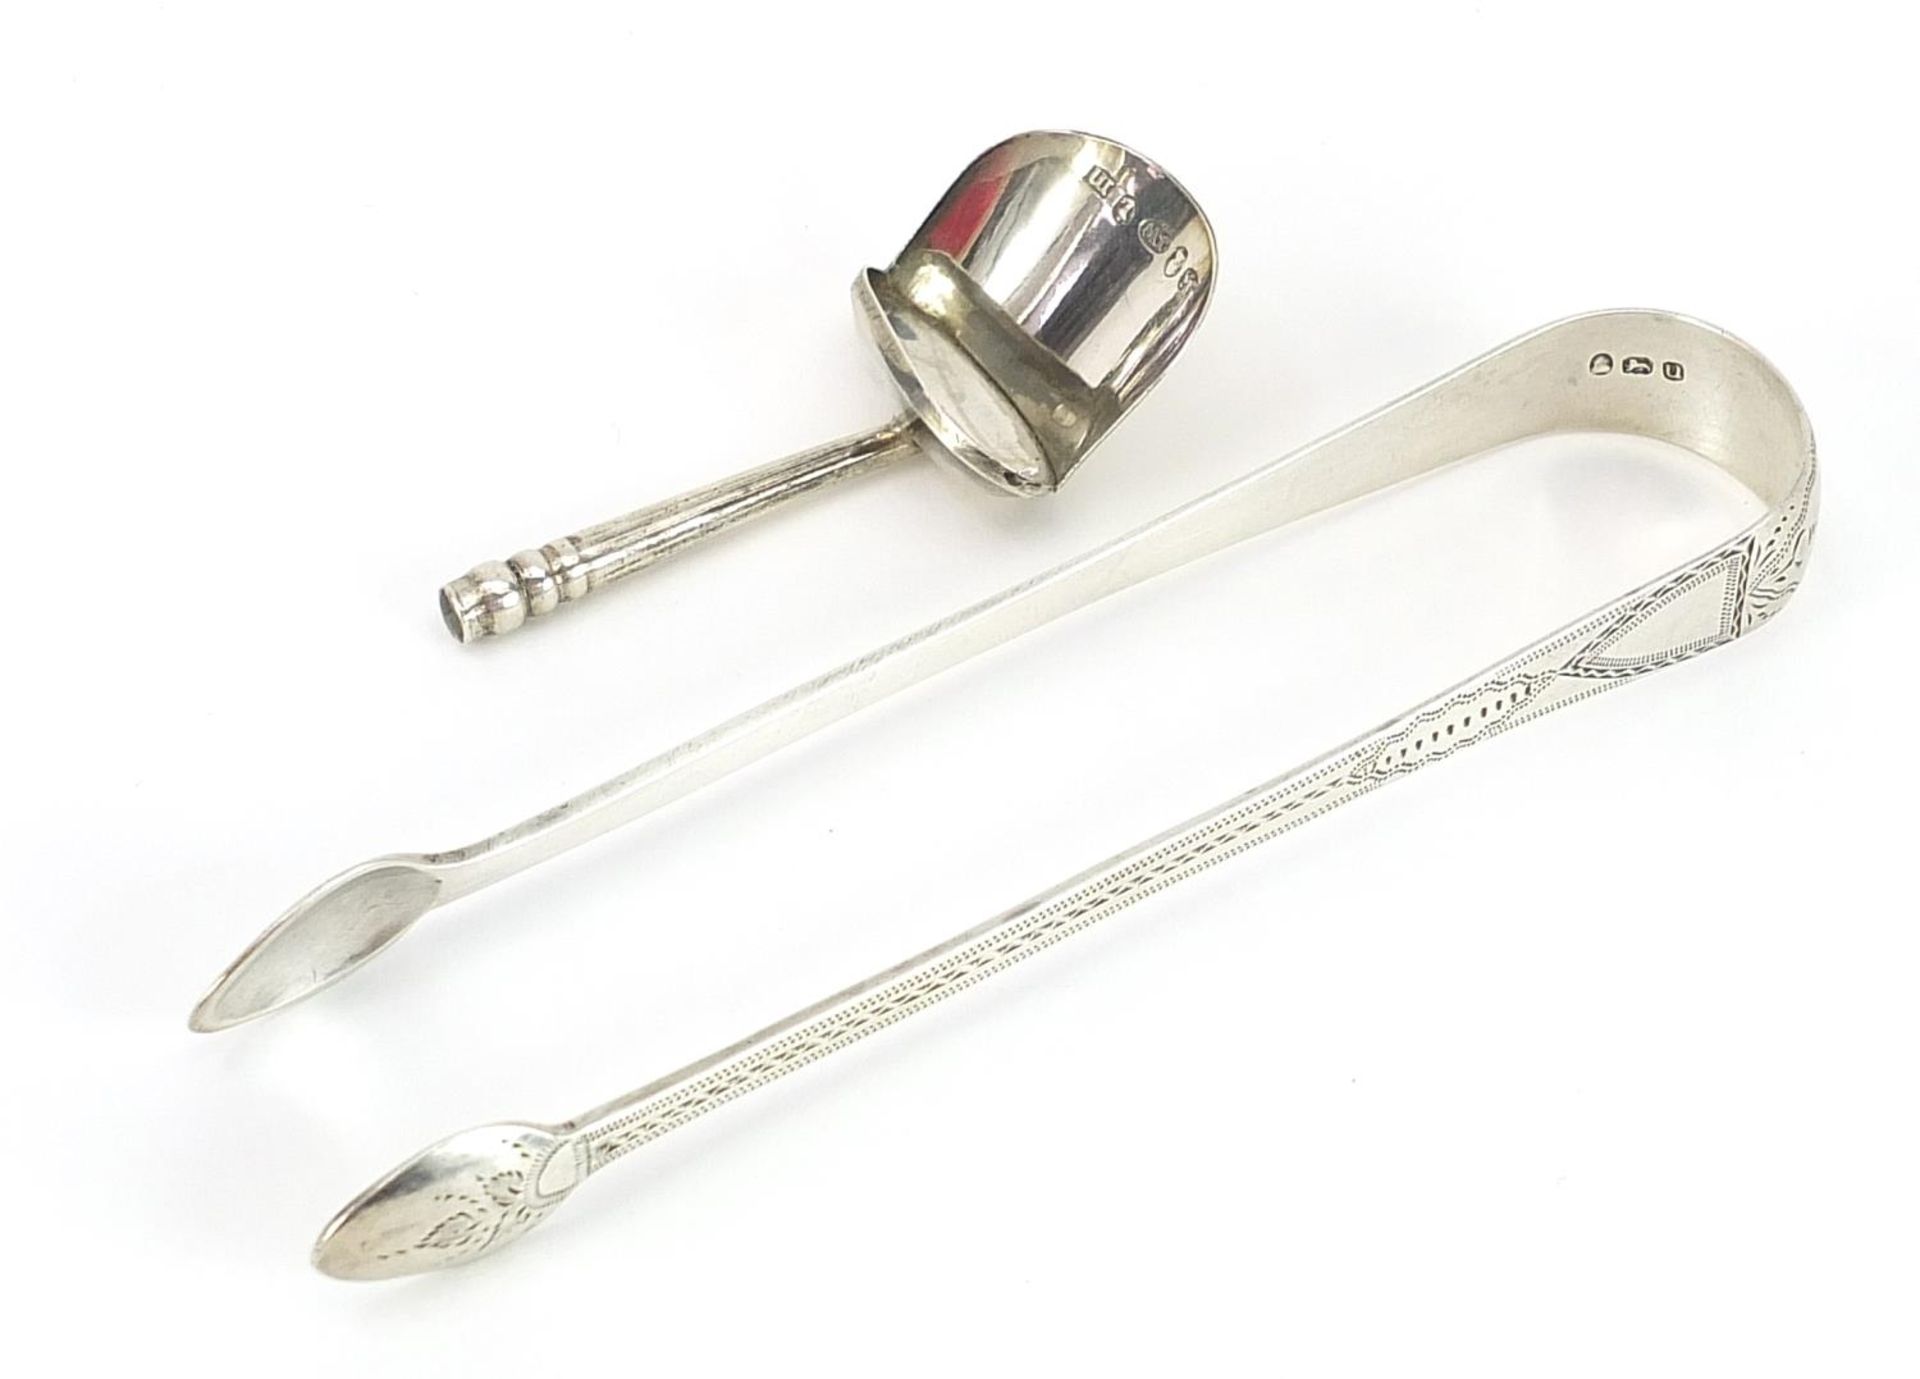 Georgian silver caddy spoon and pair of Georgian silver sugar tongs, both with incomplete hallmarks,